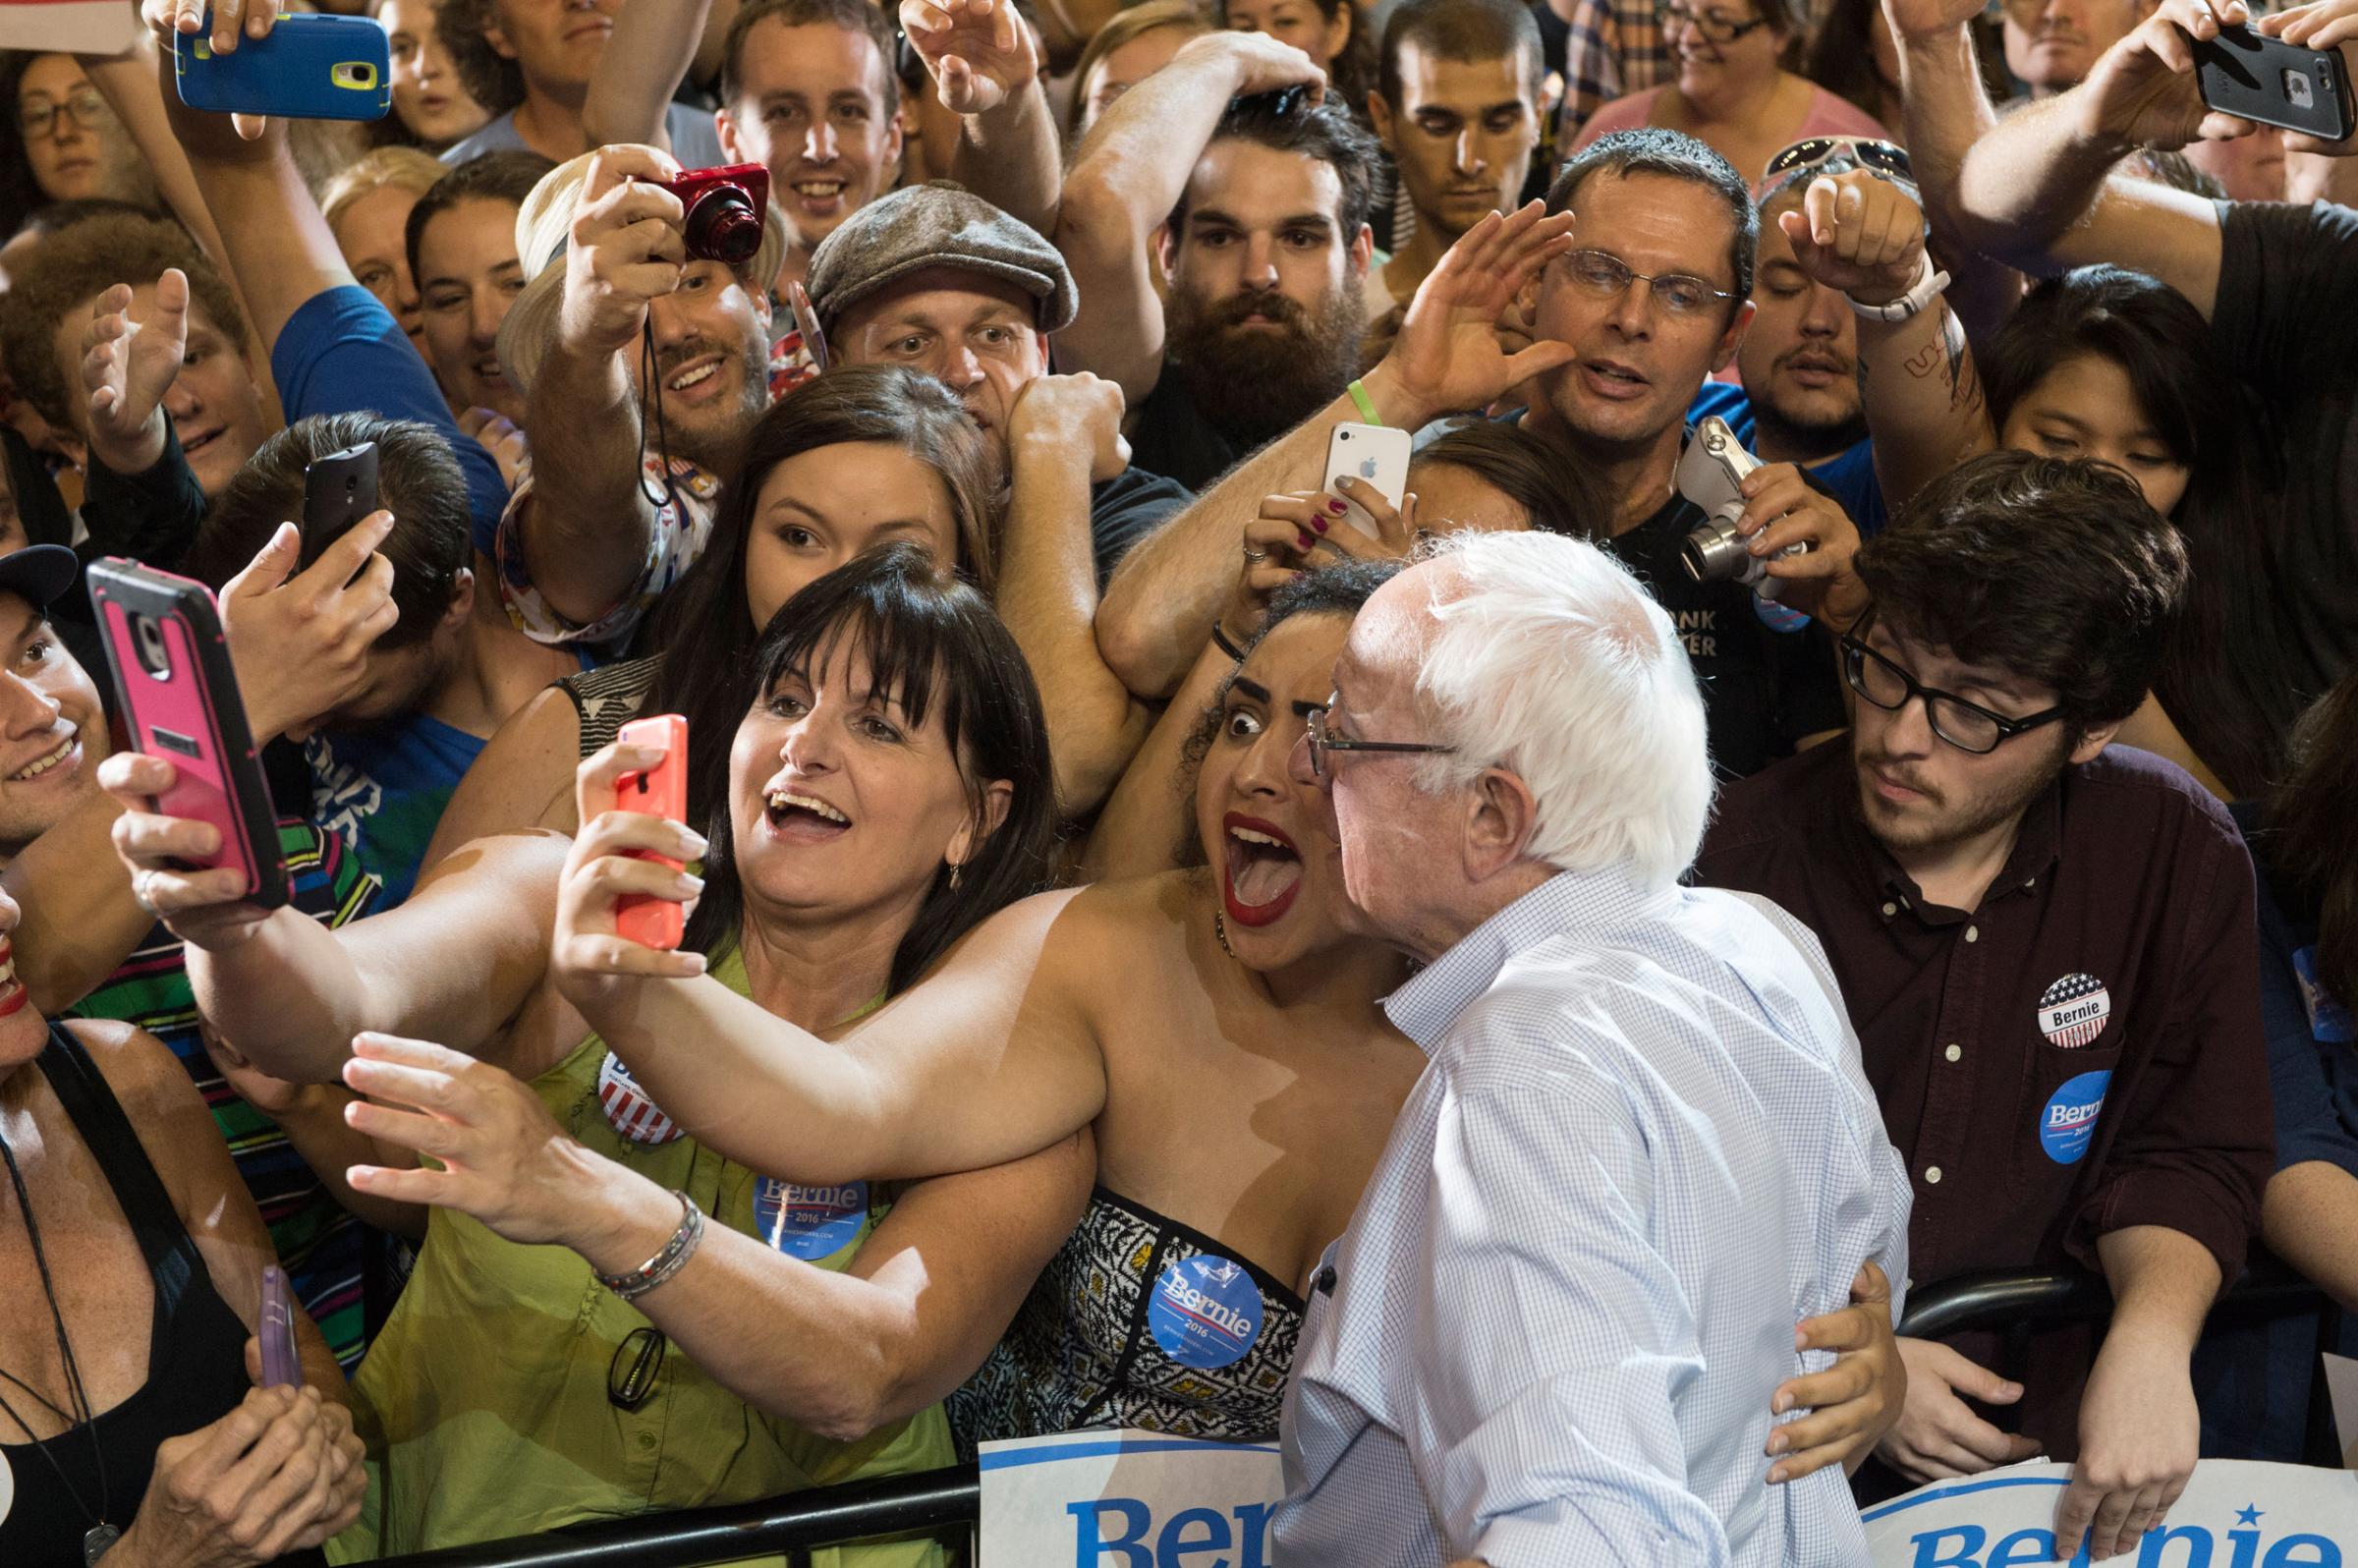 Naomi Scott, center, of McMinnville, Ore., takes a picture with Democratic presidential candidate Senator Bernie Sanders, I-Vt., at a rally at the Moda Center in Portland, Ore. Aug. 9, 2015.